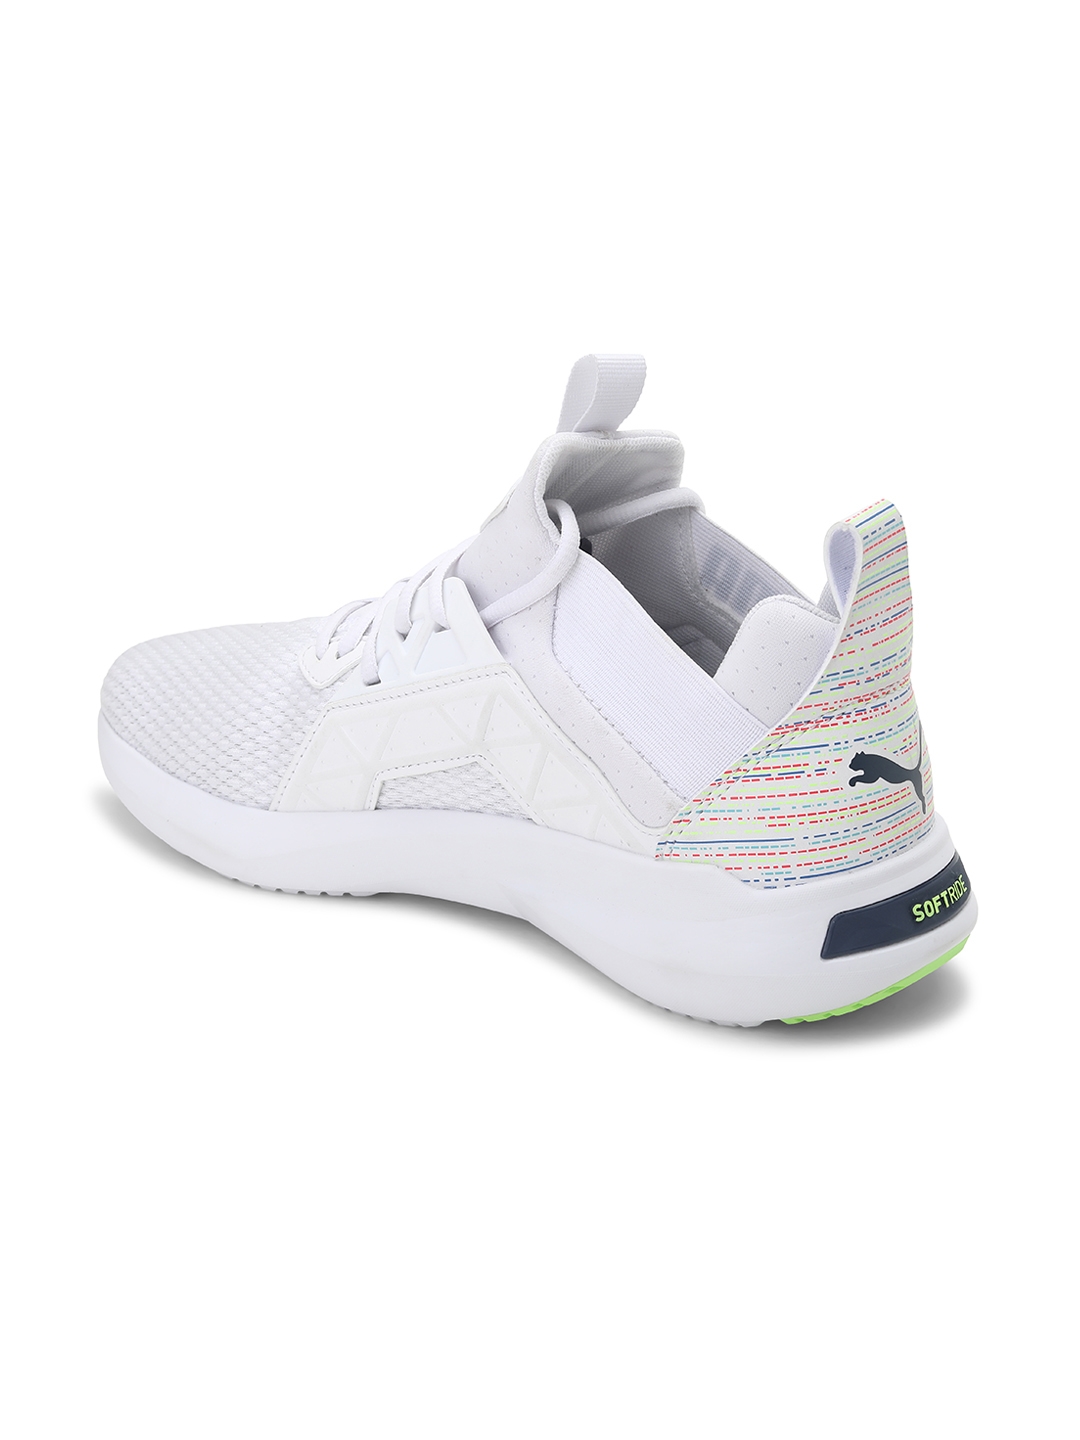 Puma | SOFTRIDE Enzo NXT Spectra Unisex Sneakers 1